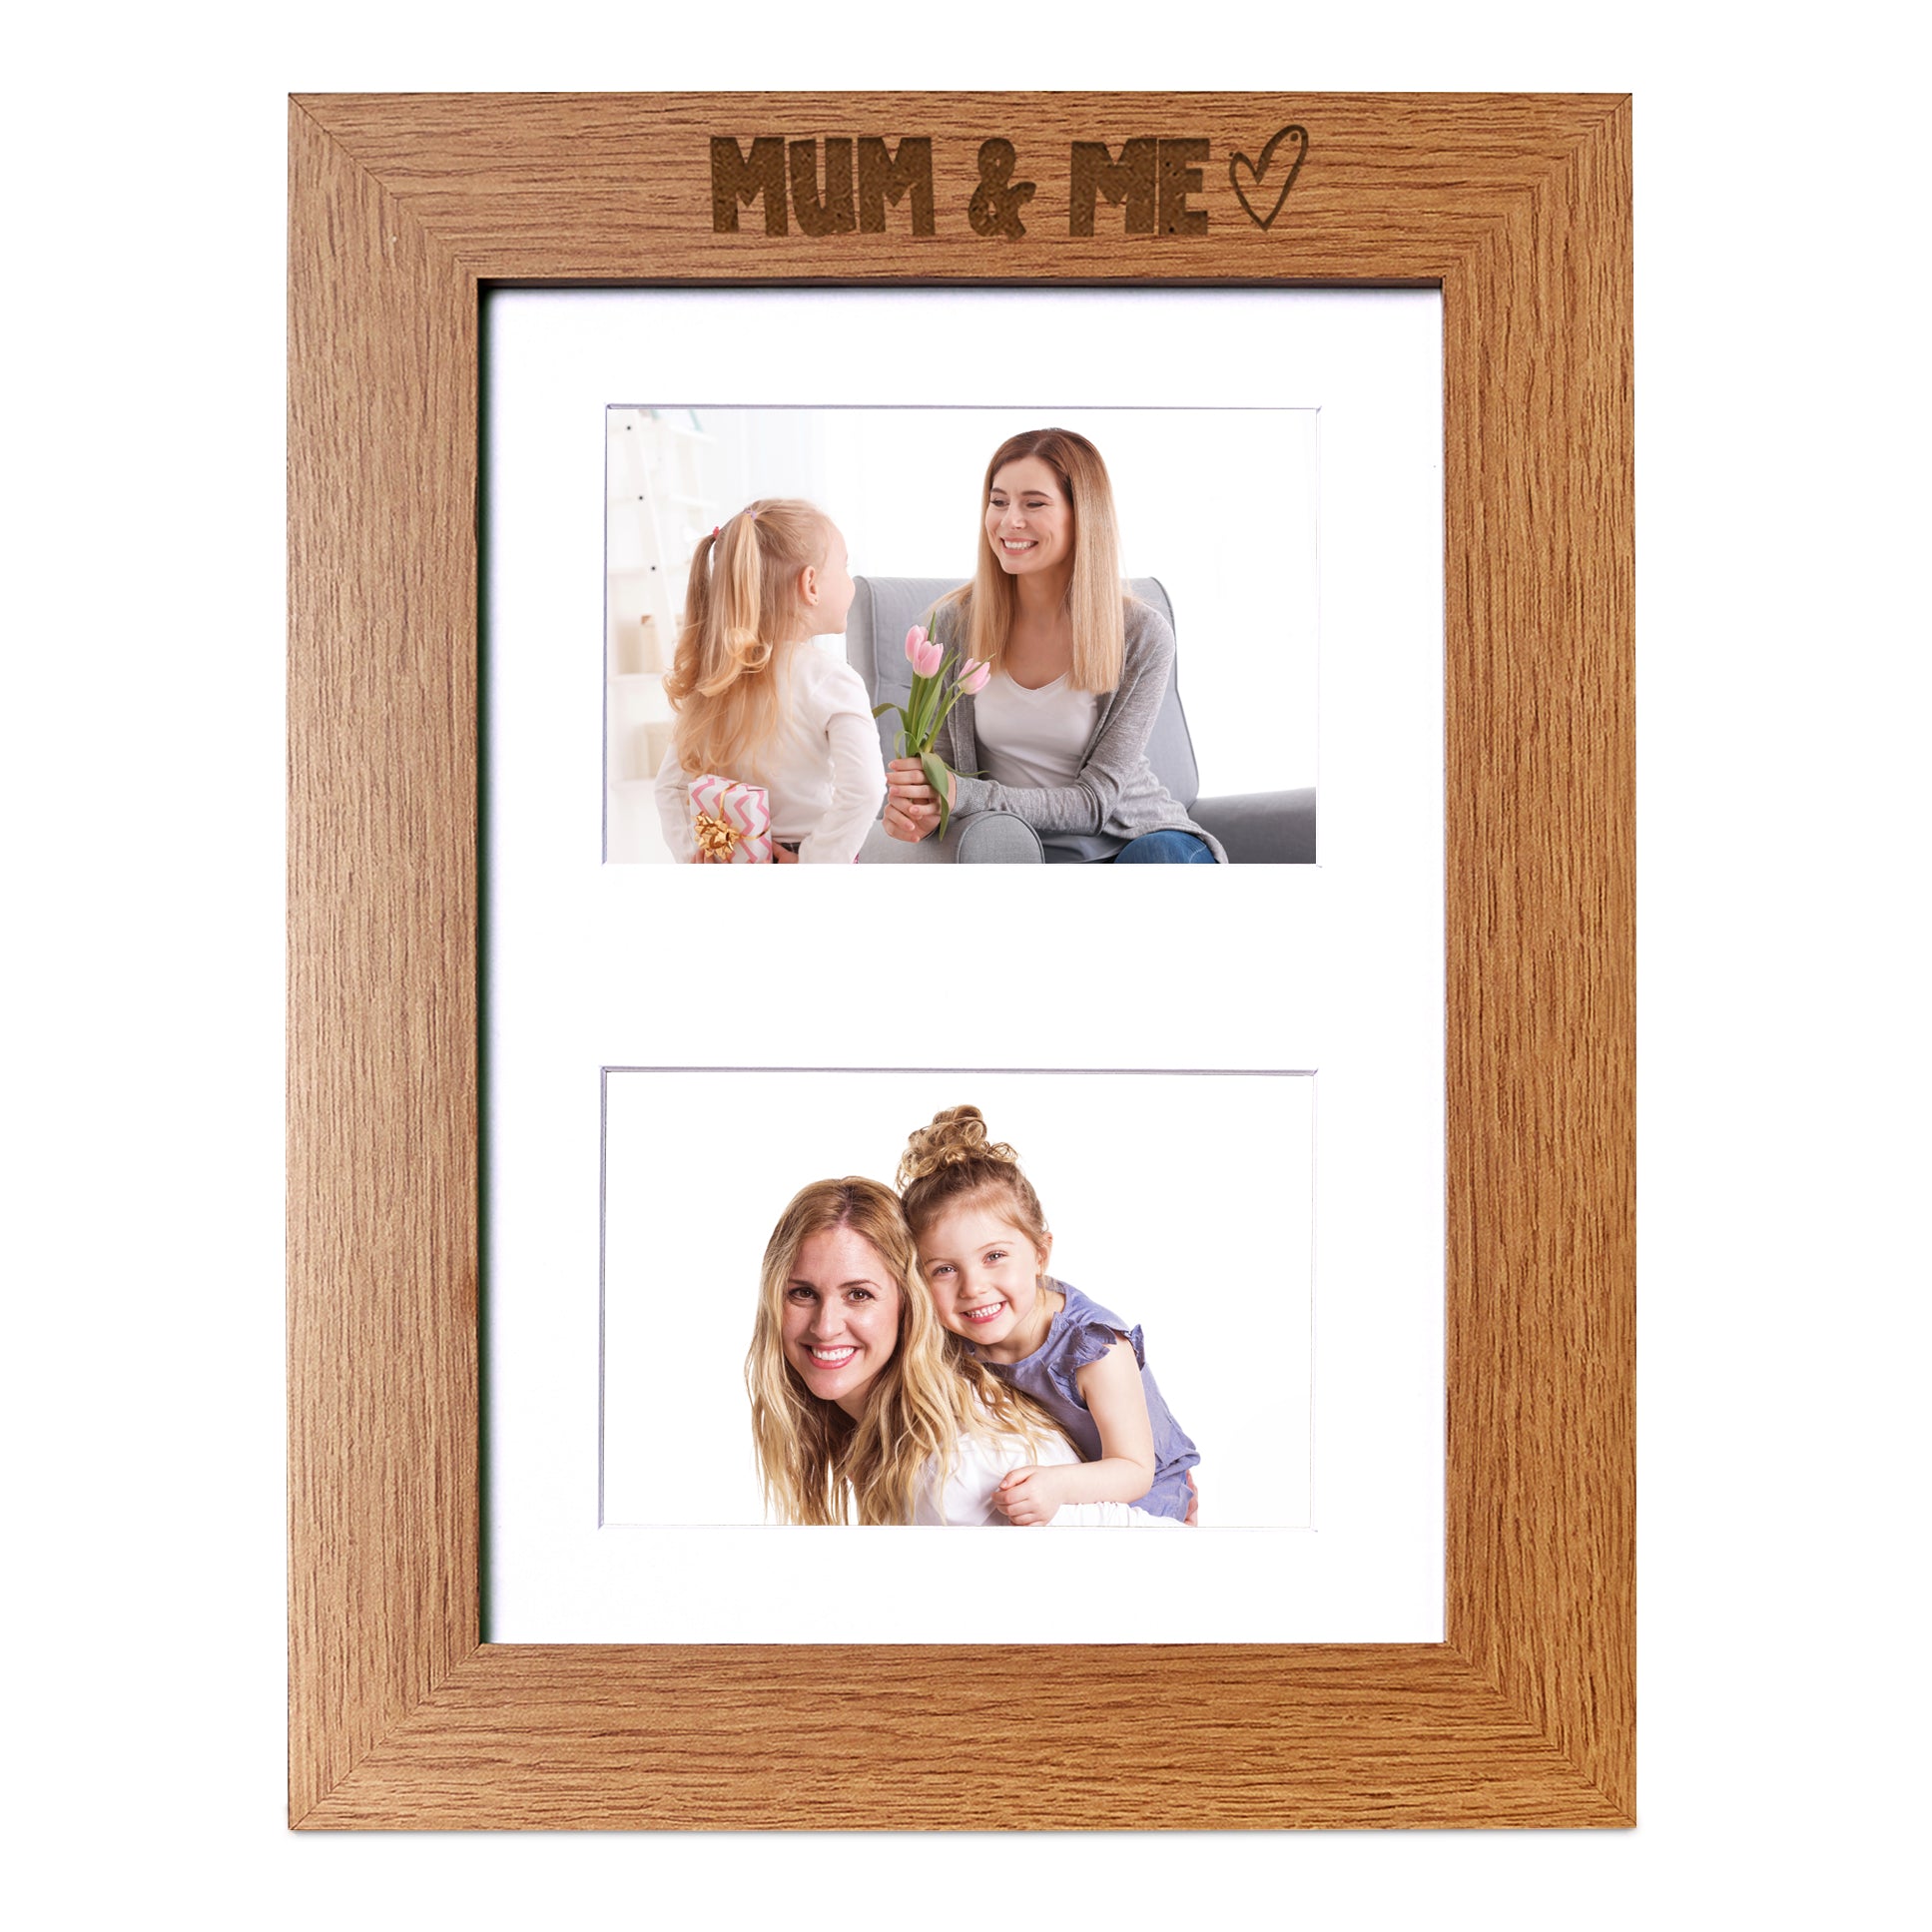 Mum and Me Photo Picture Frame Double 6x4 Inch Landscape